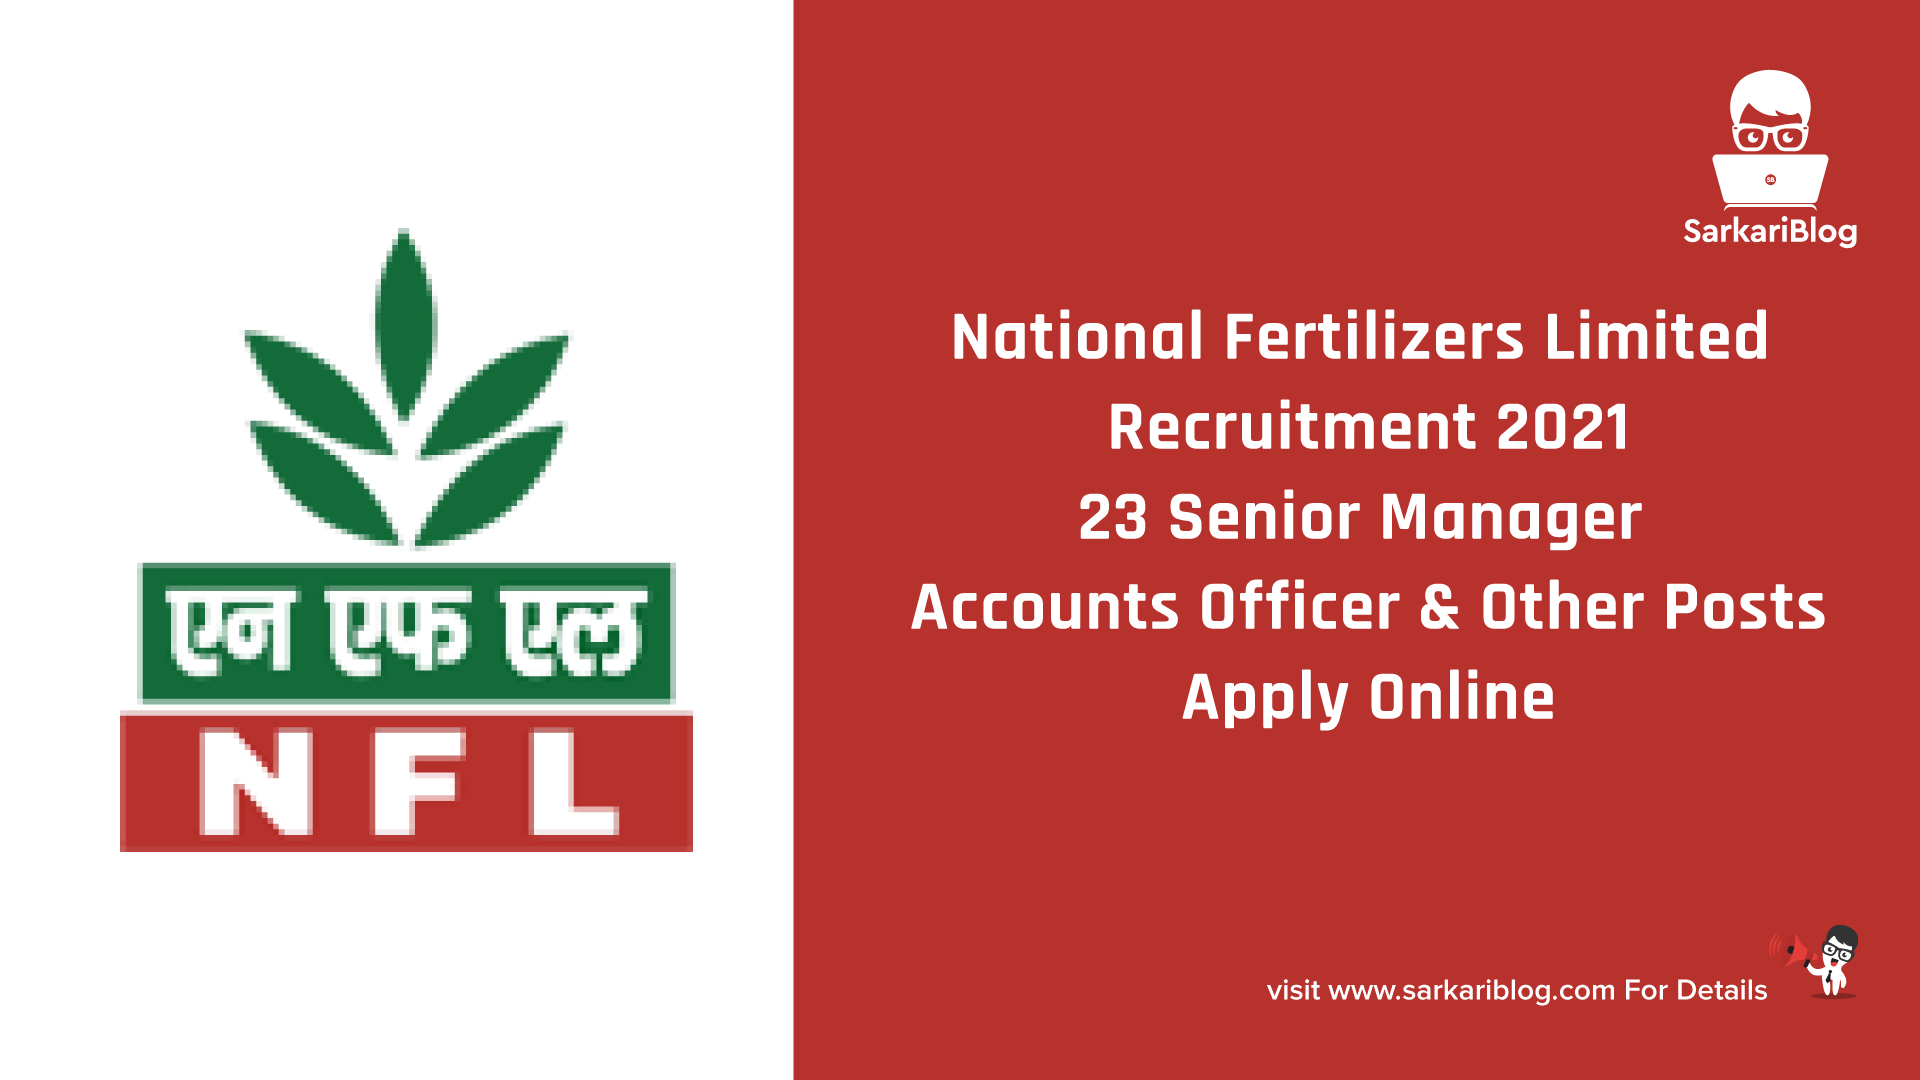 National Fertilizers Limited Recruitment 2021 - 23 Senior Manager, Accounts Officer & Other Posts, Apply Online